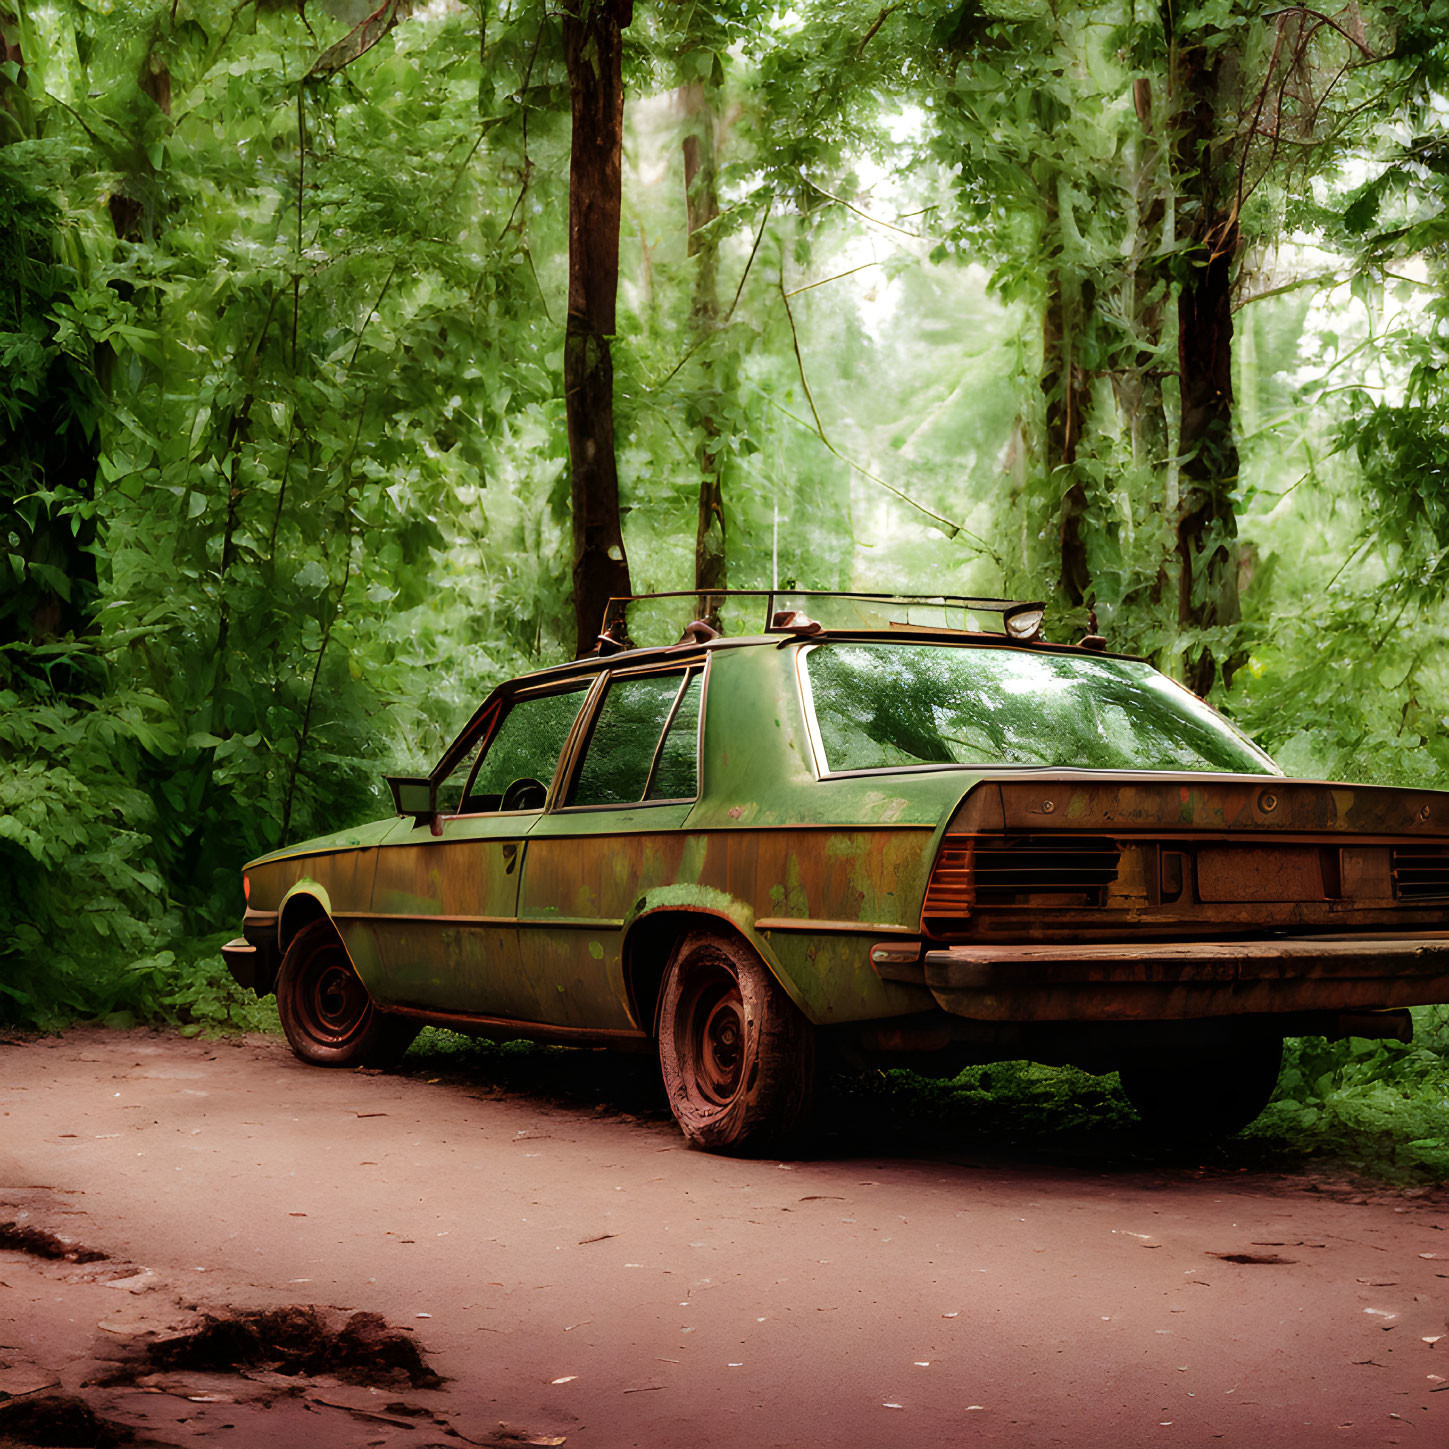 Abandoned green sedan covered in rust and moss in forest setting